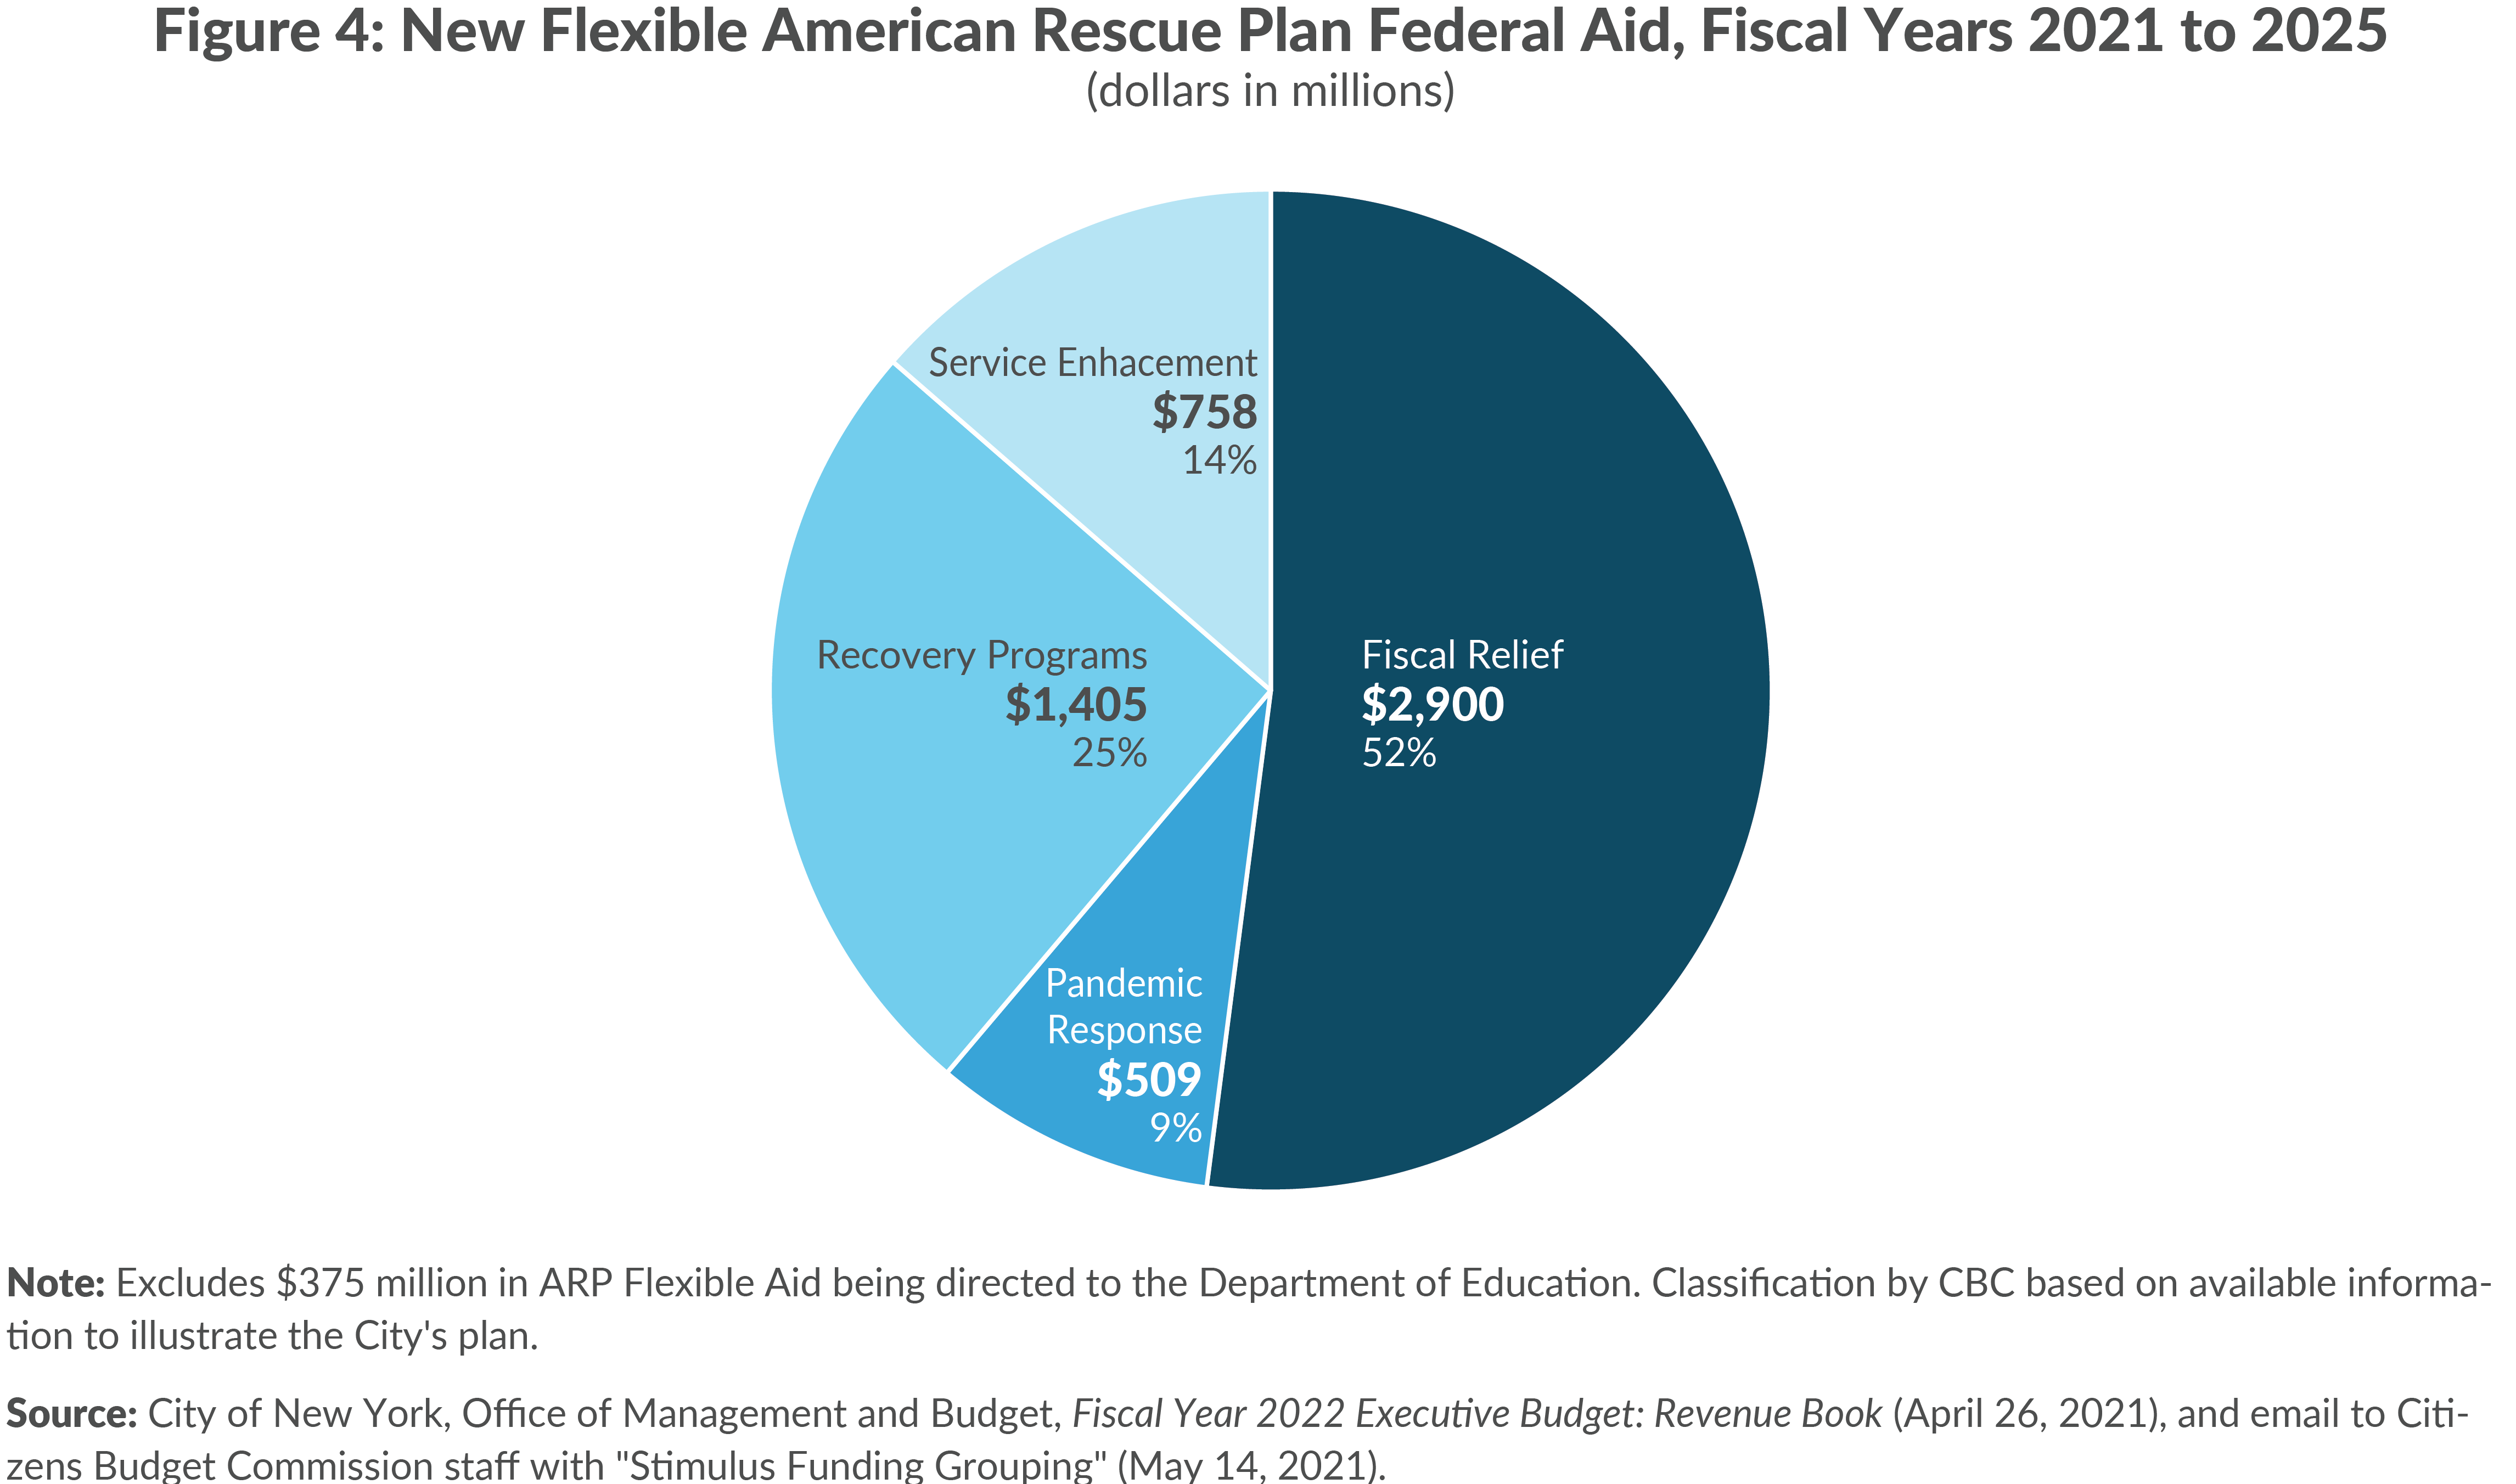 Figure 4: New Flexible American Rescue Plan Federal Aid, FY2021-2025